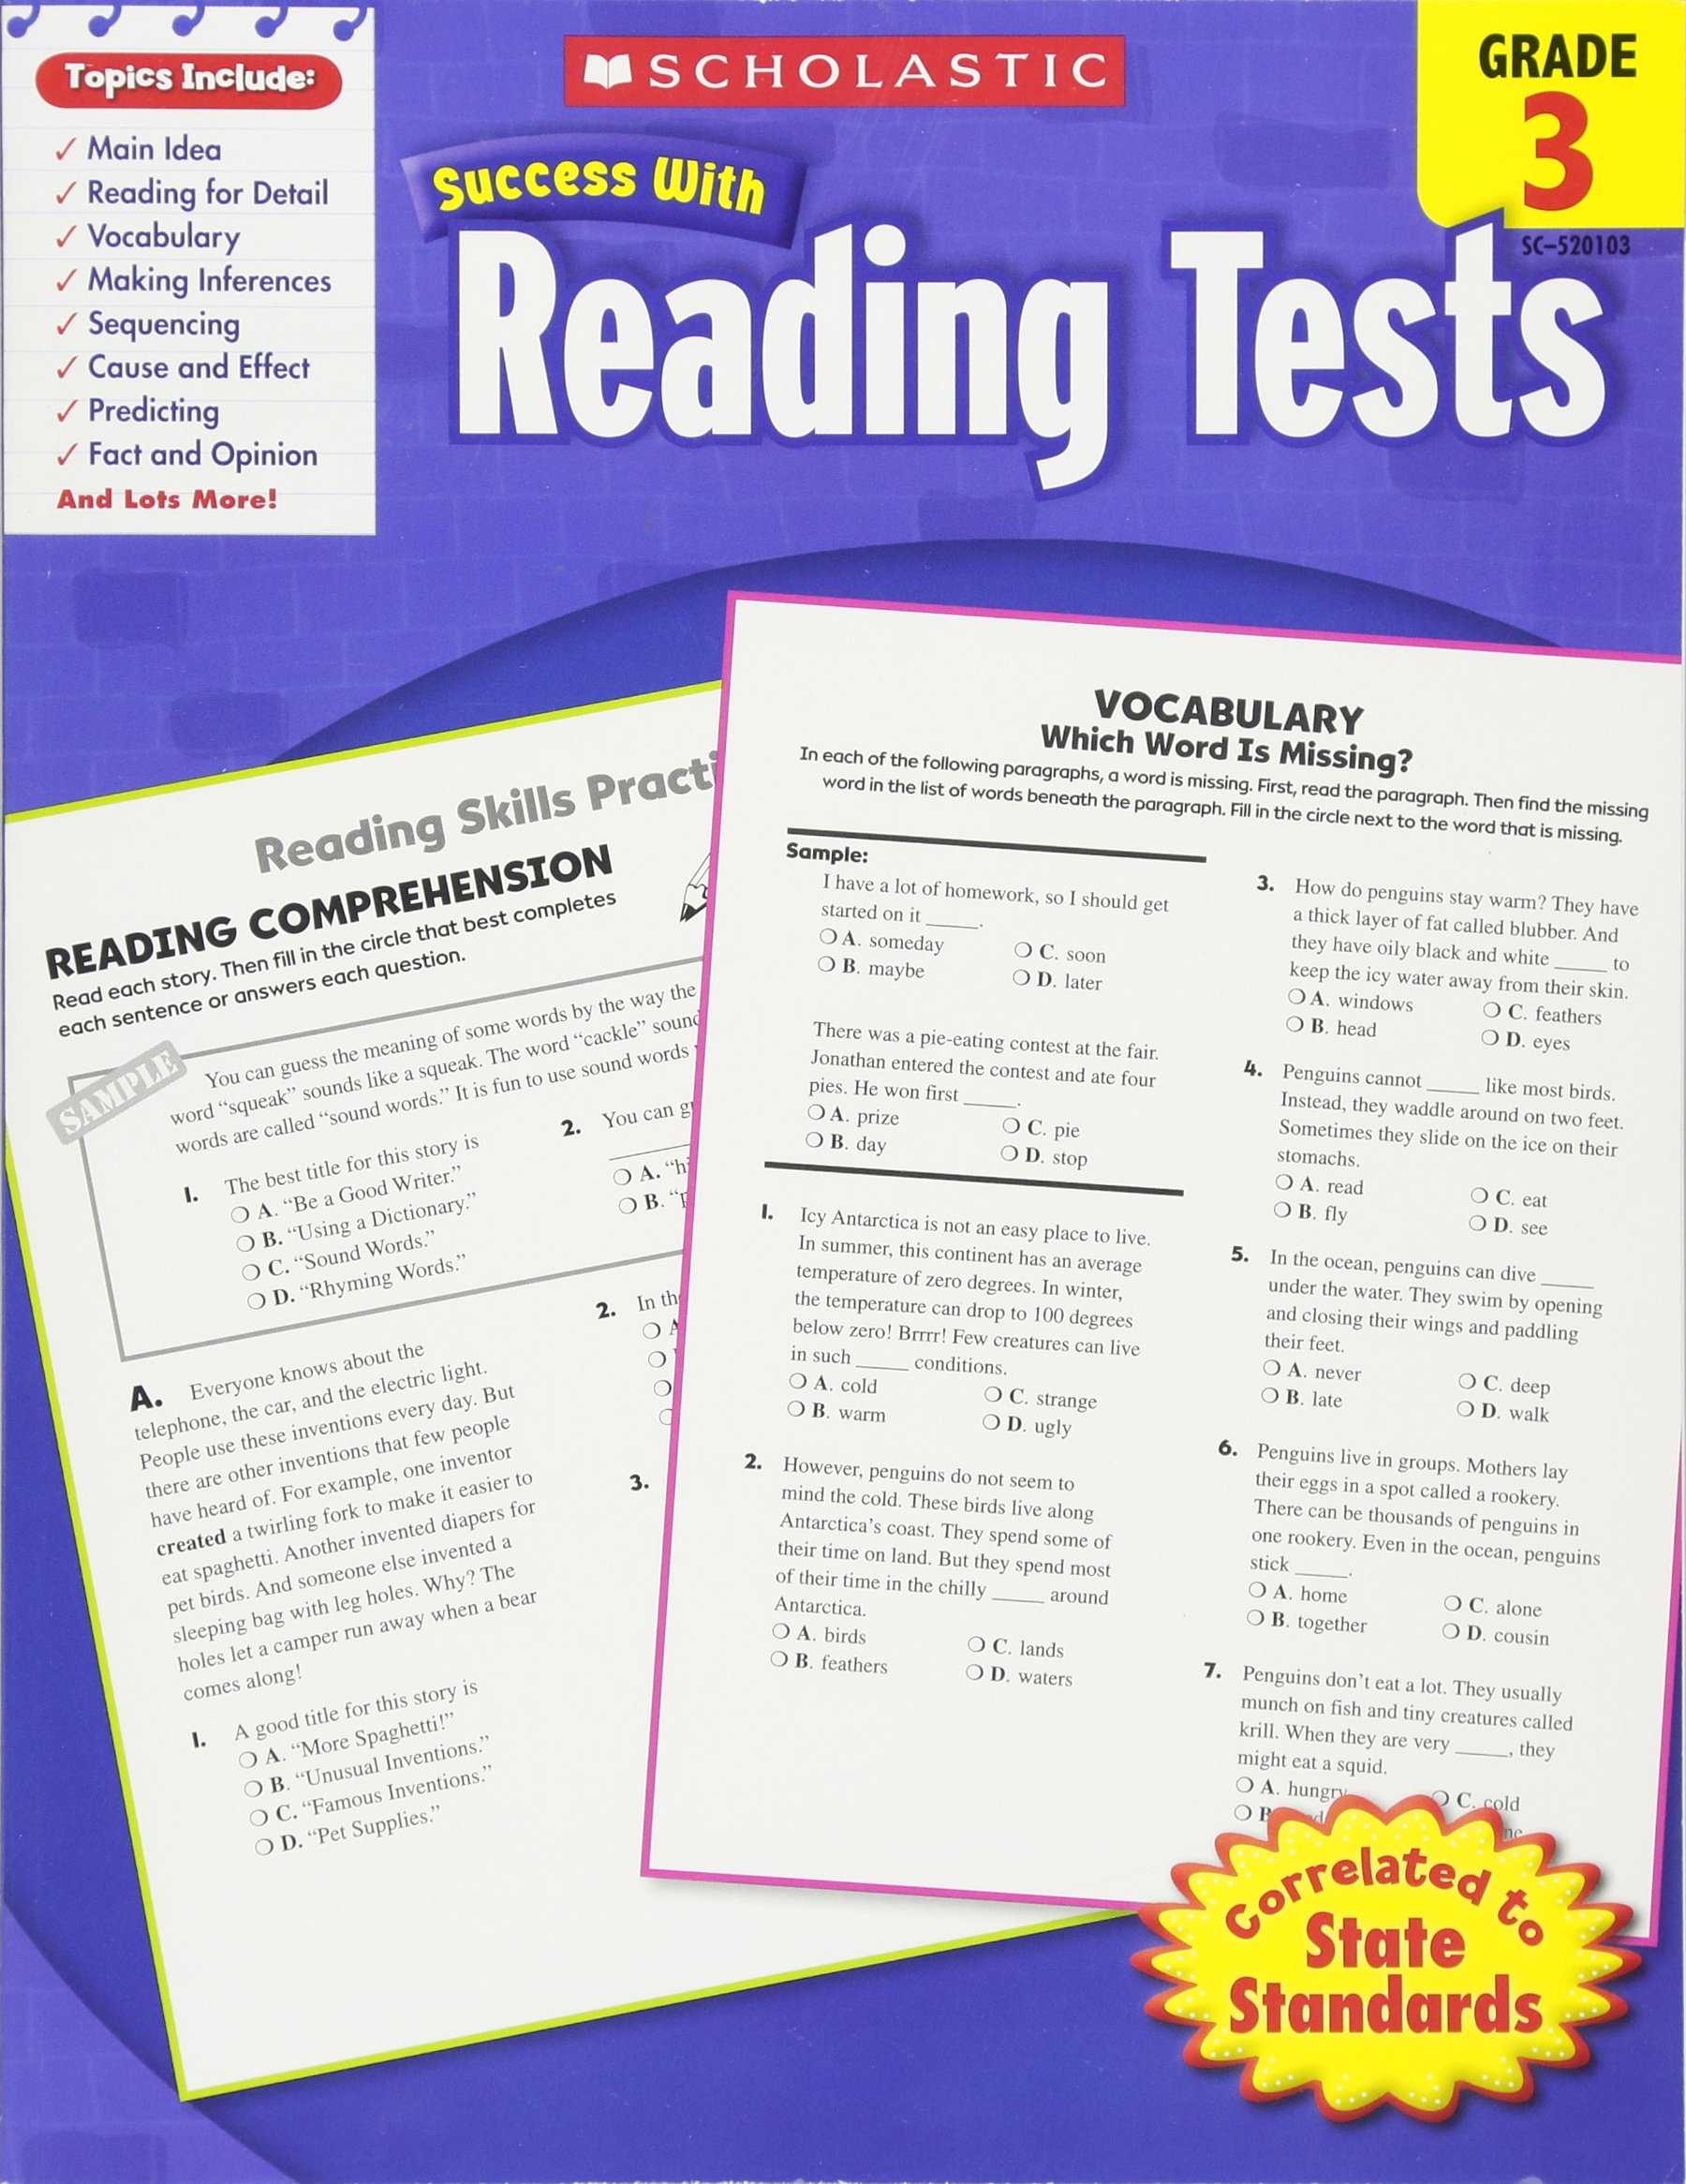 Interest Groups Worksheet Answers Also Amazon Scholastic Success with Reading Tests Grade 3